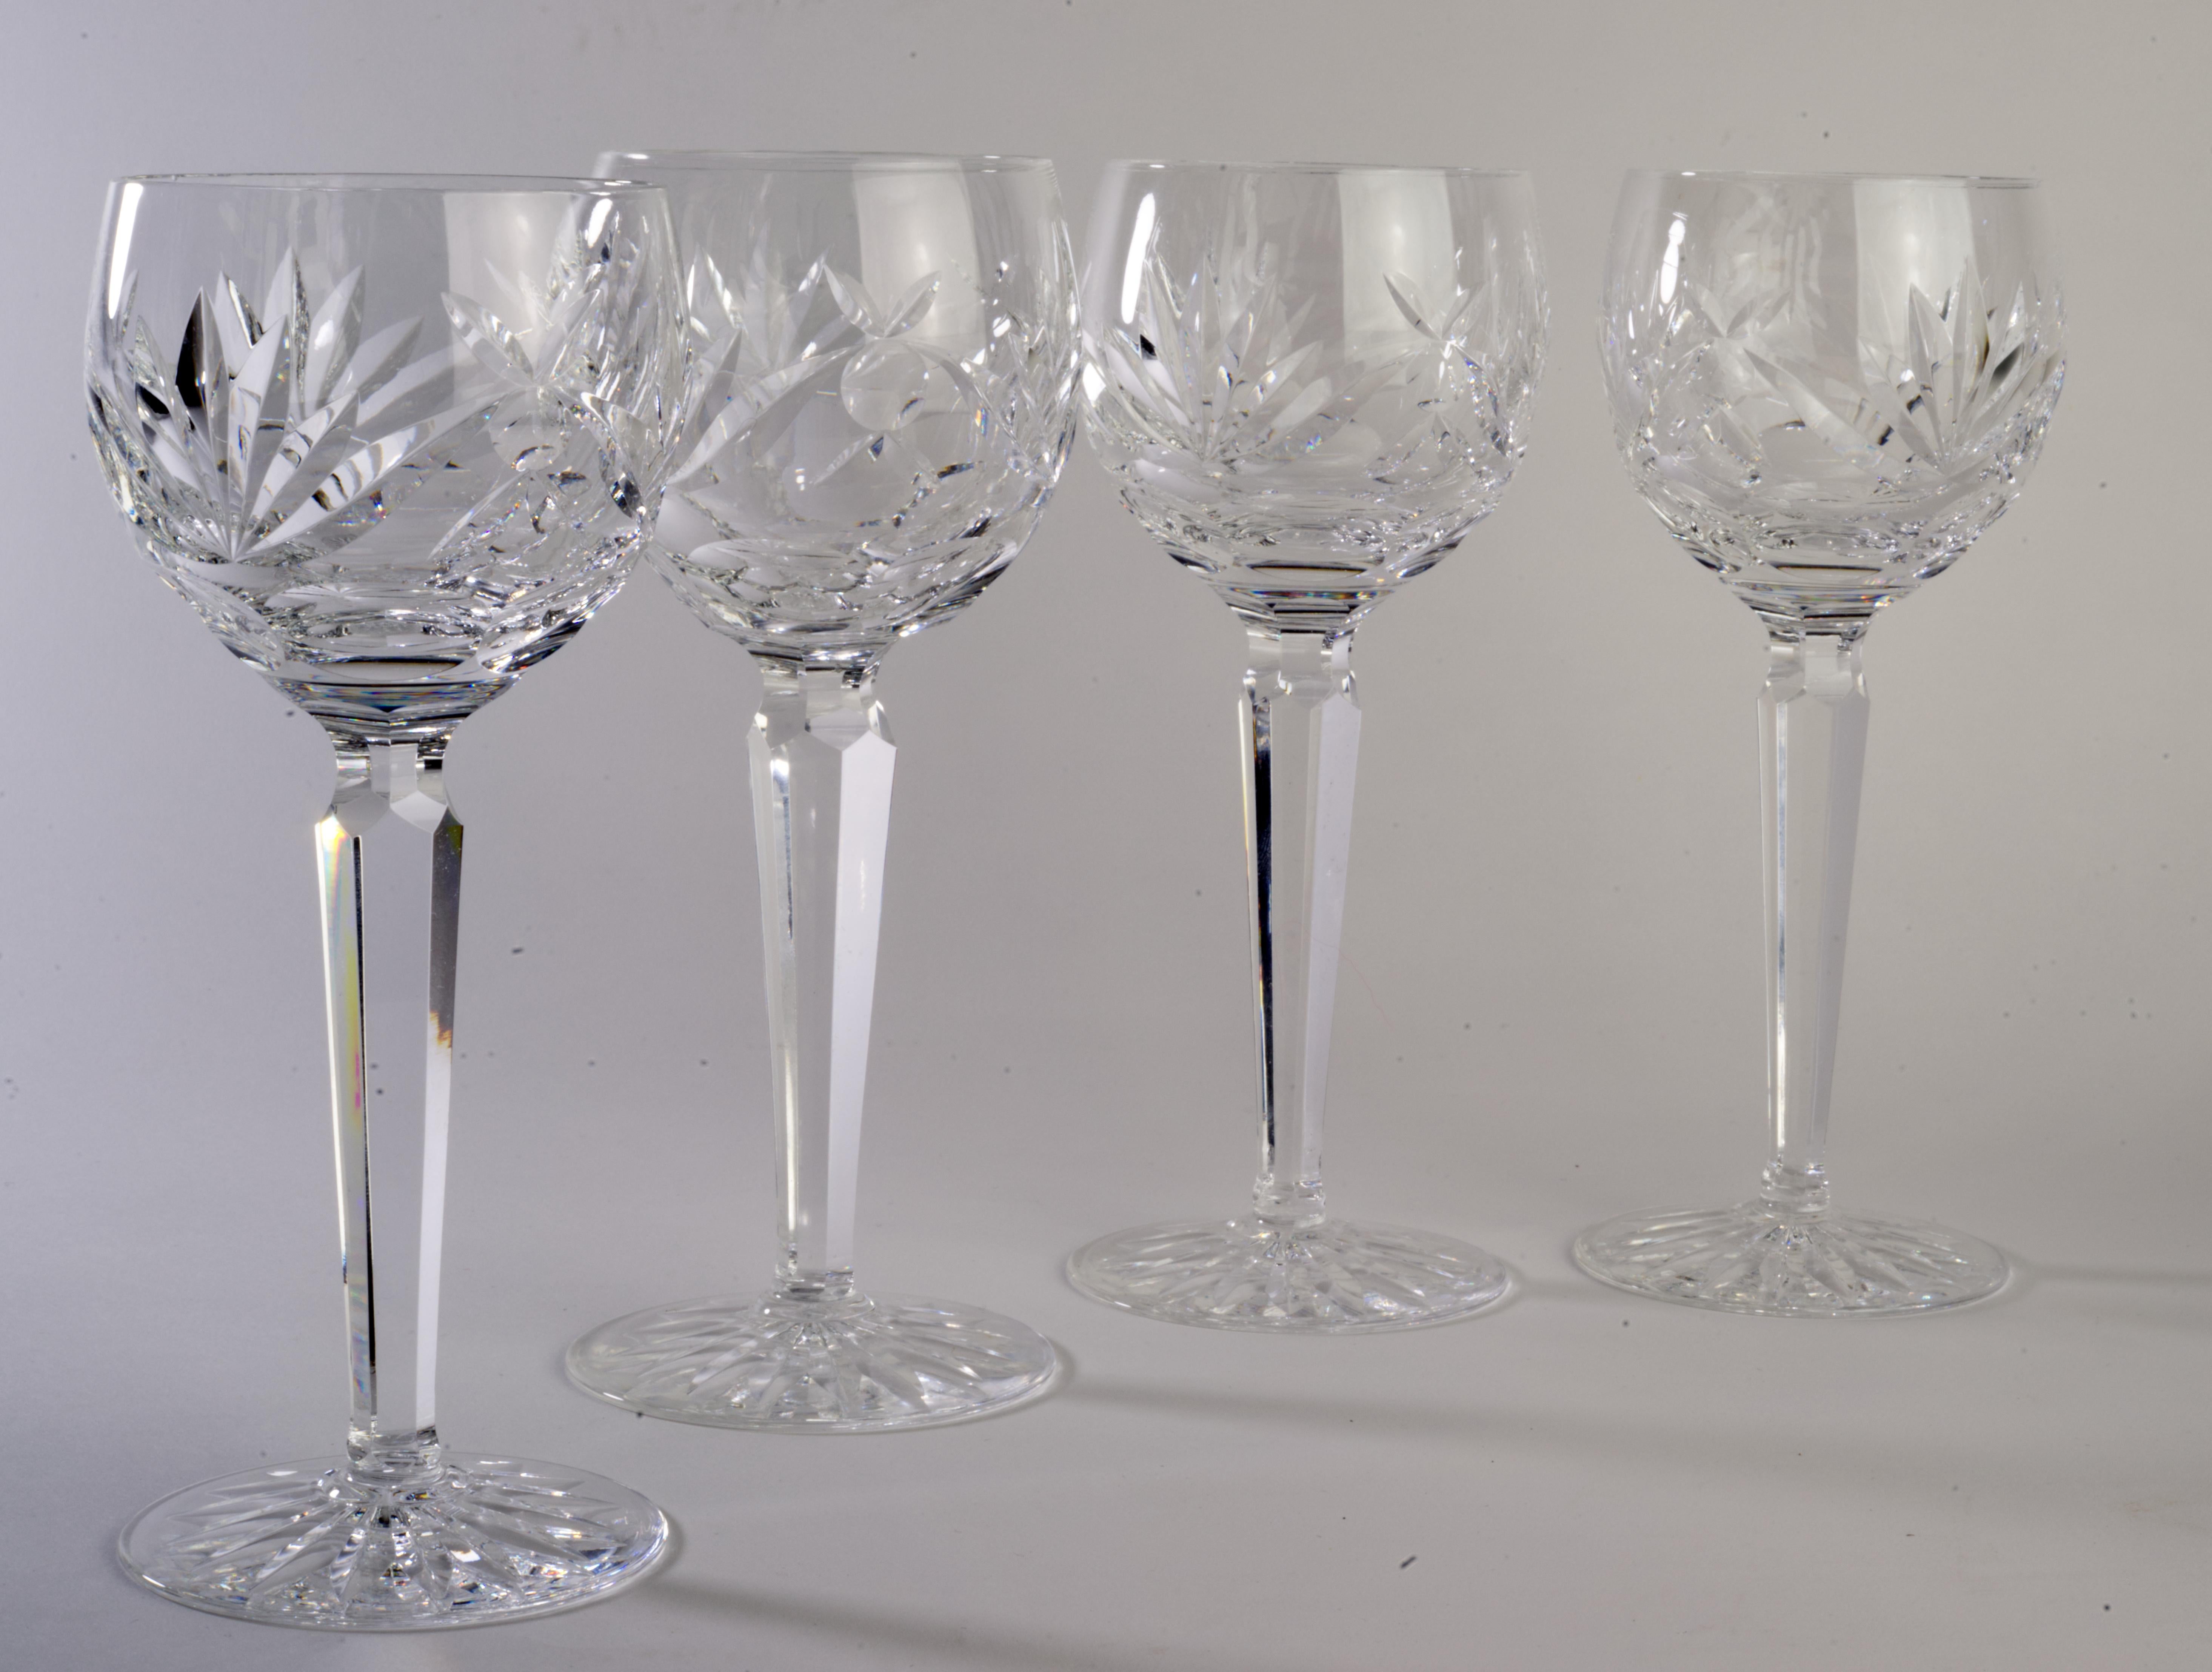  Vintage set of 4 hock wine glasses was made by Waterford in Ashling pattern, with 2 sets available at the time of the listing. Ashling pattern is described by cut fans and panels and multisided stem; the pattern was produced from 1968 to